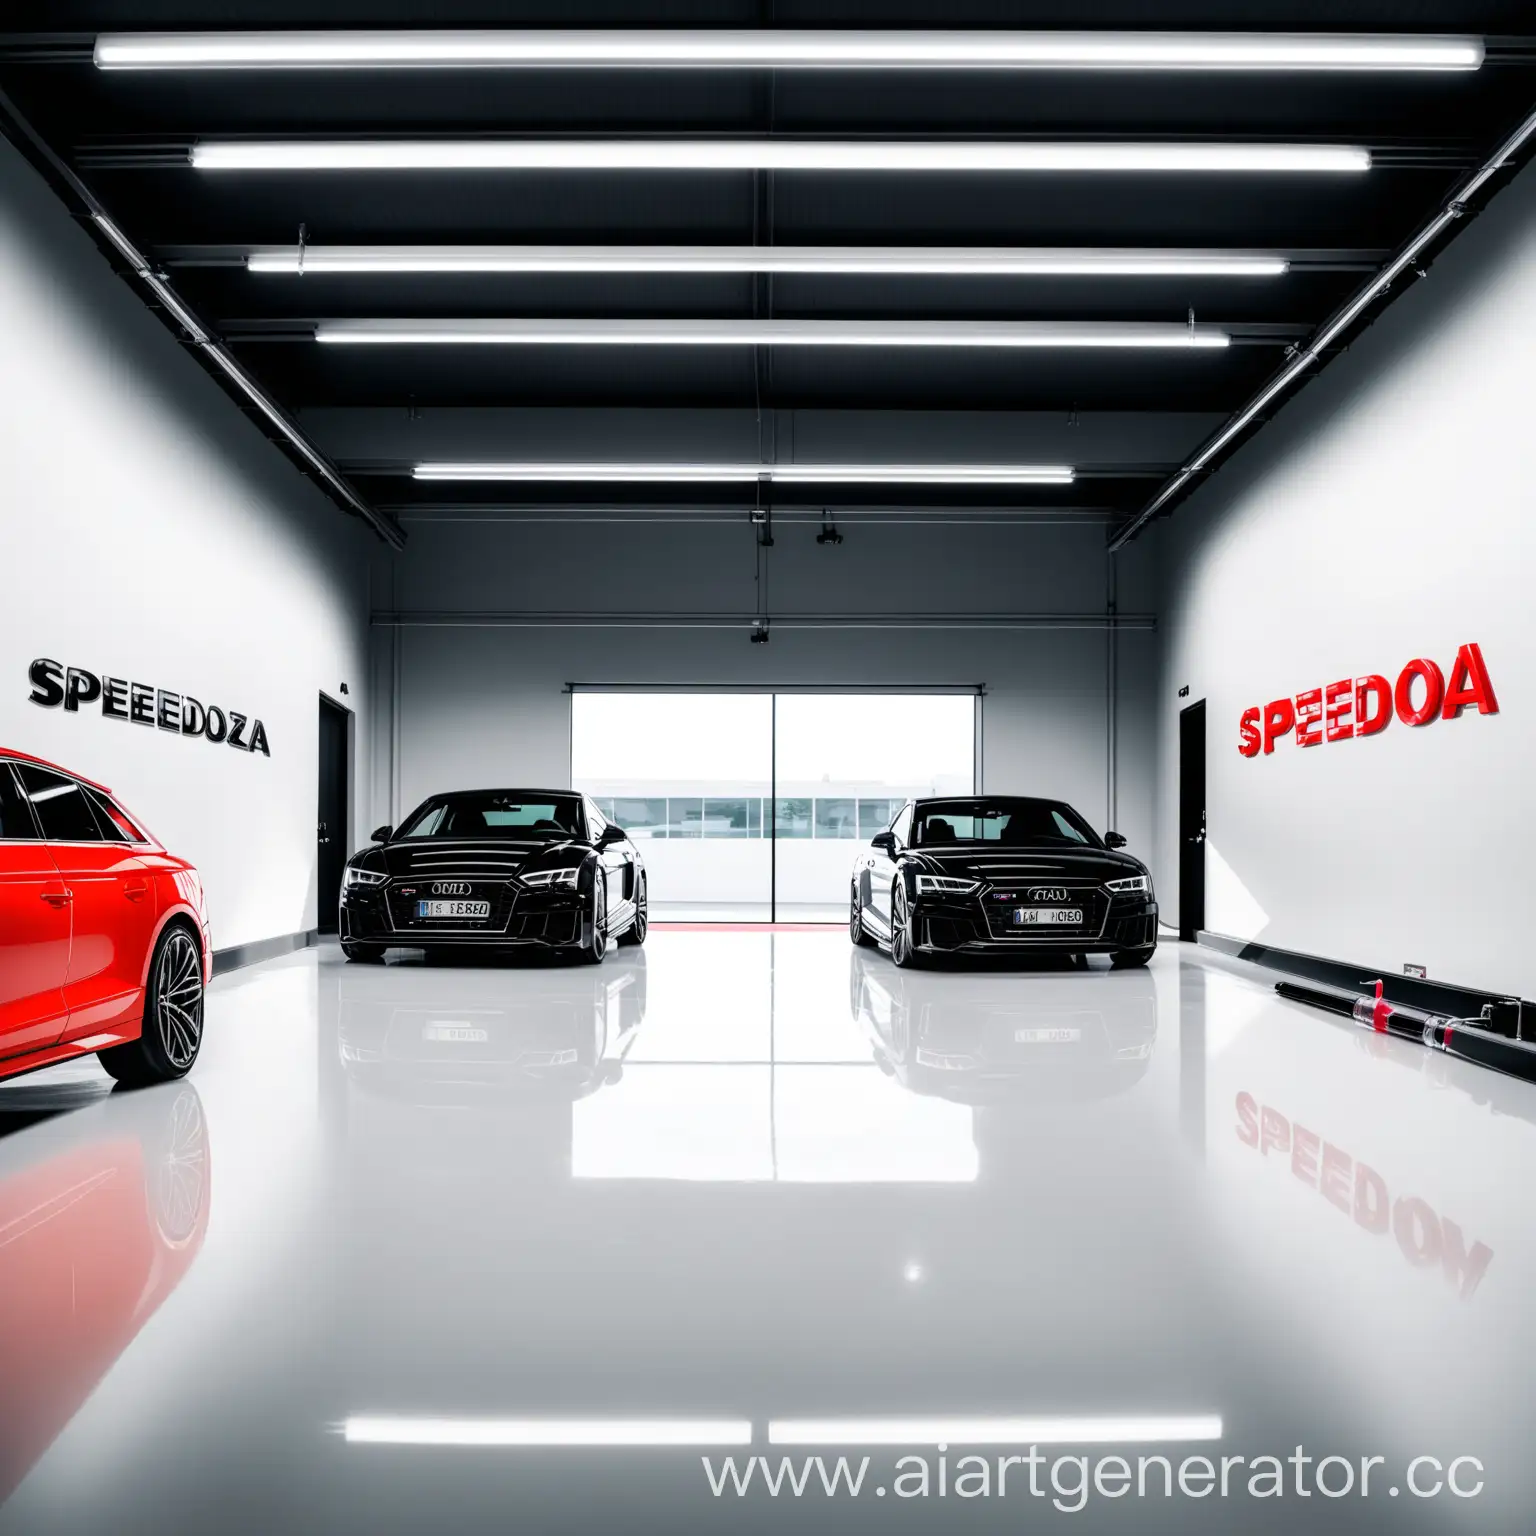 Audi in the background, main letters SpeeDoza in English letters on a white wall, black car, black discs, syringe on the floor, white floor, red walls, black glass, garage, tinted windows, clear text, high-quality text